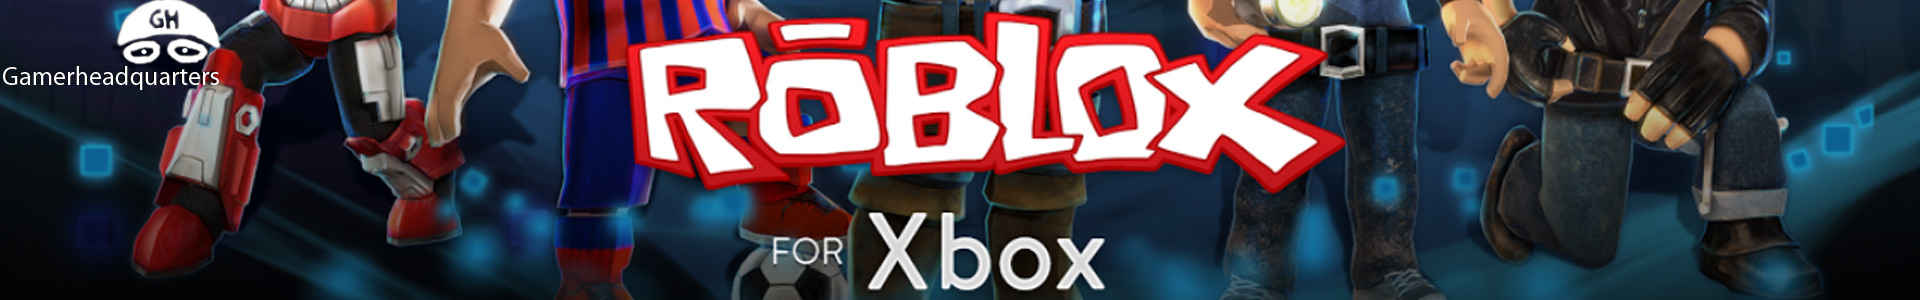 Roblox Xbox One Games List Gamerheadquarters - roblox natural disaster survival xbox mobile youtube